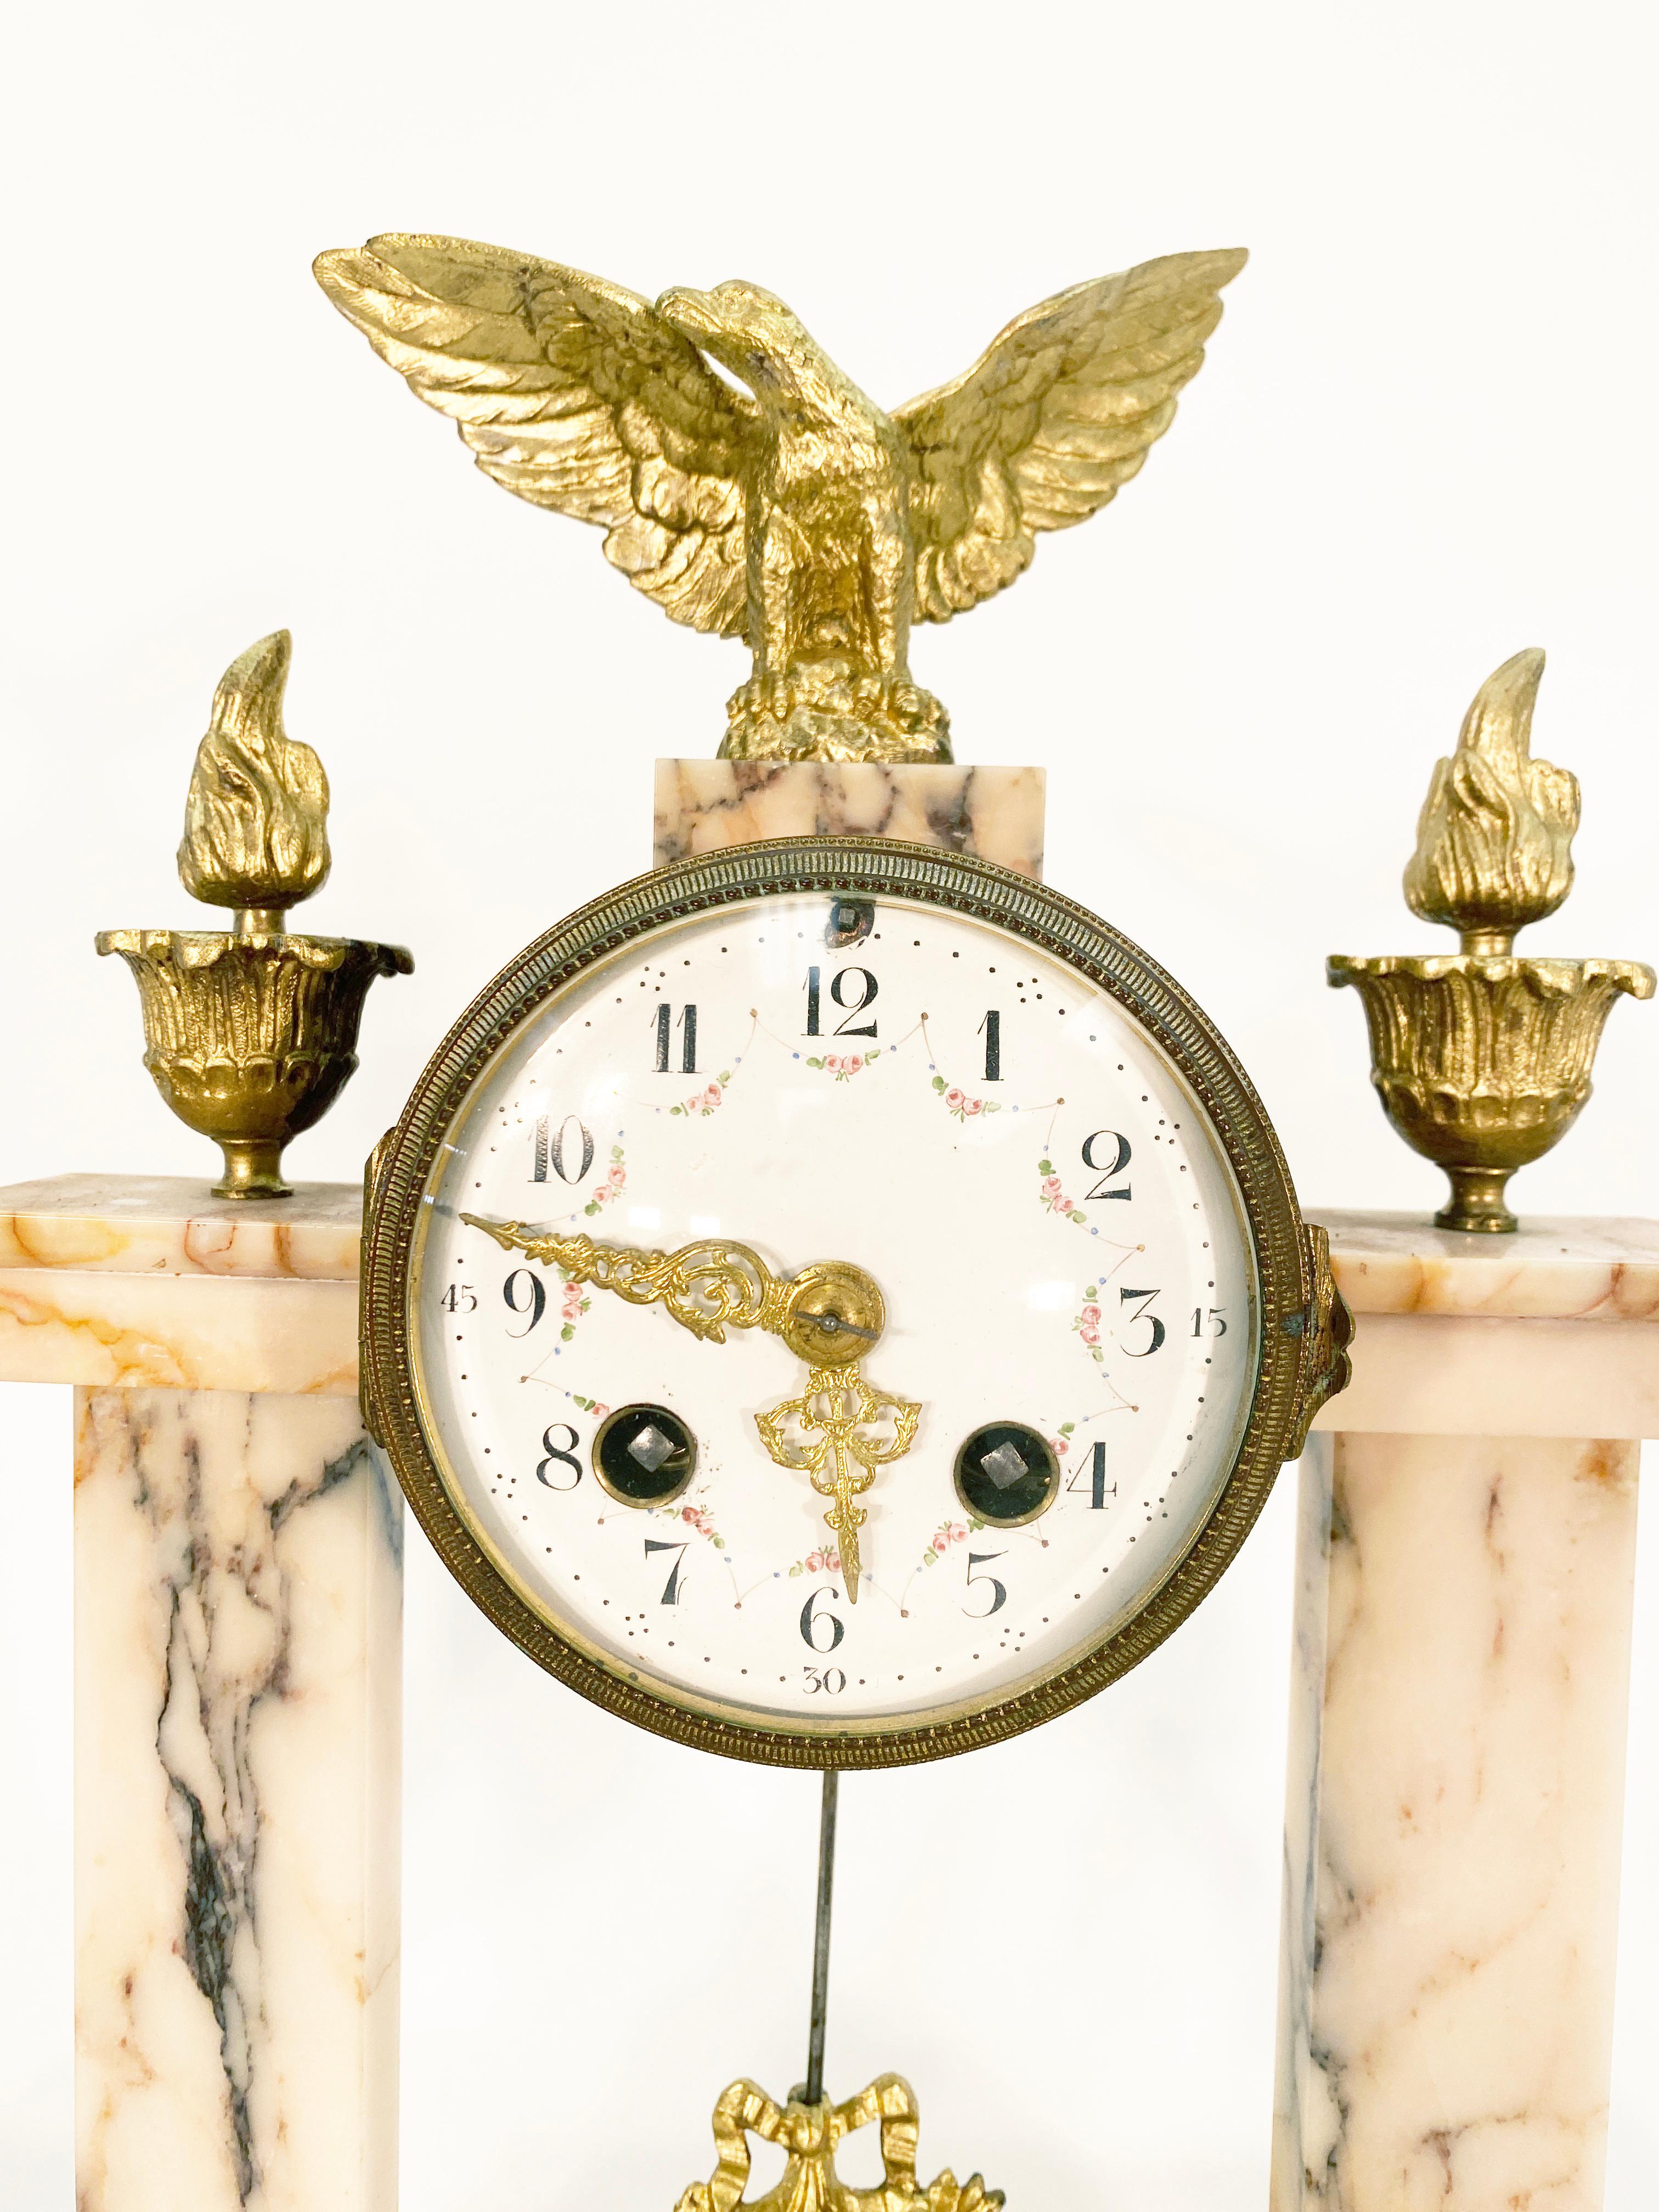 French marble and bronze gilt three piece garniture clock. Clock features marble columns supporting the central clock. Enamel faced and hand painted dial bronze gilt details in the feet, pendulum, min and hour hands with eye catching details of